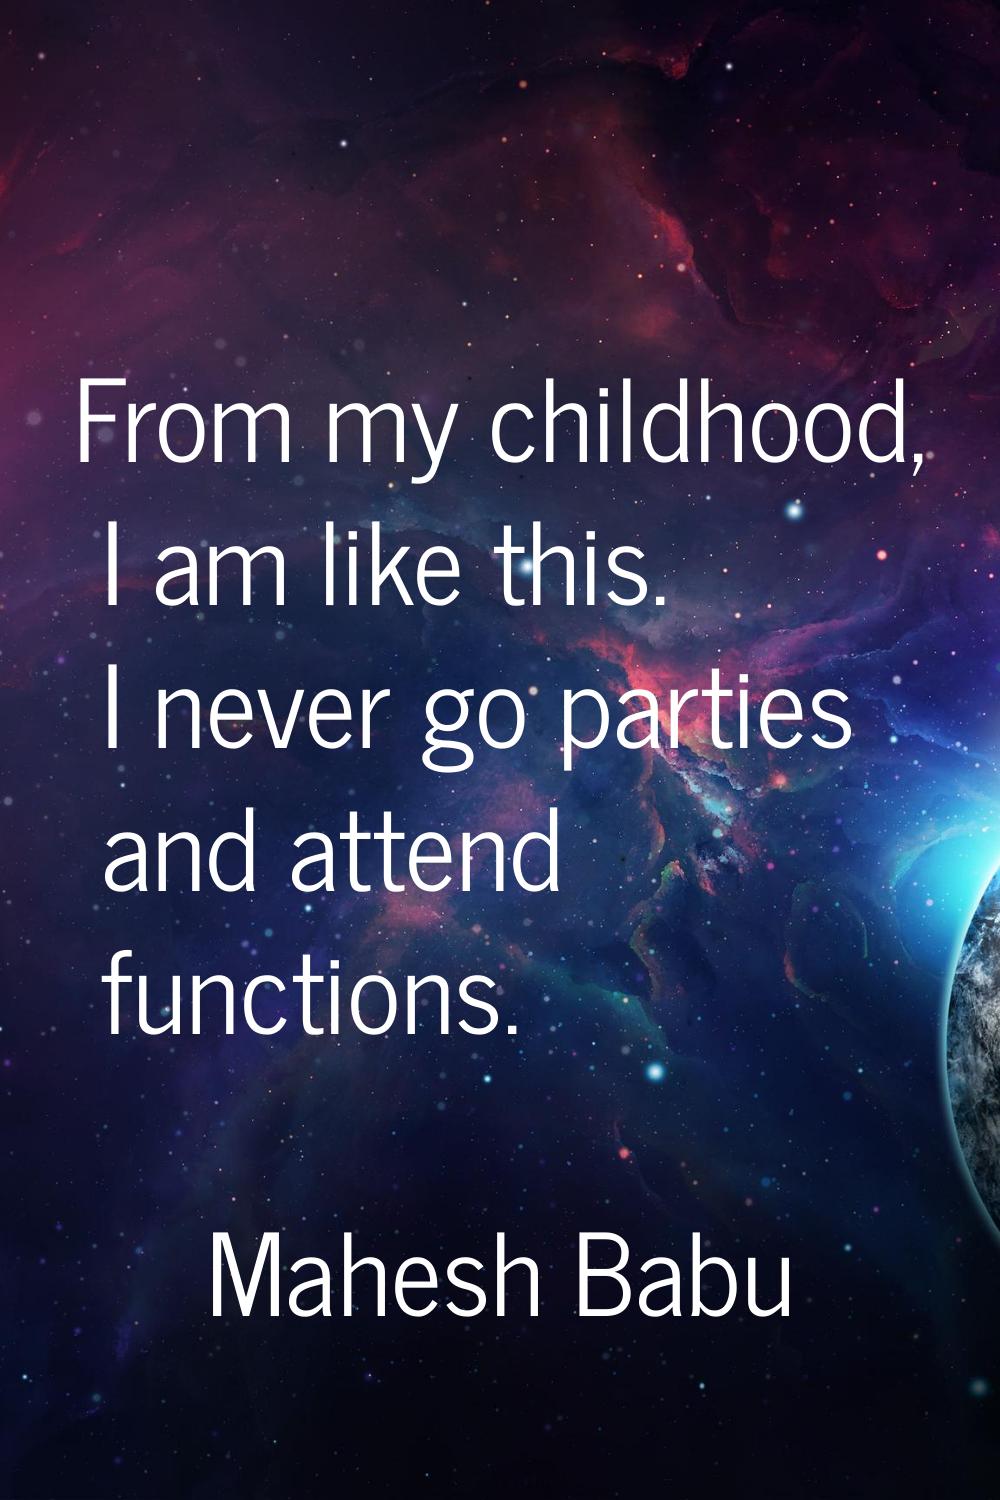 From my childhood, I am like this. I never go parties and attend functions.